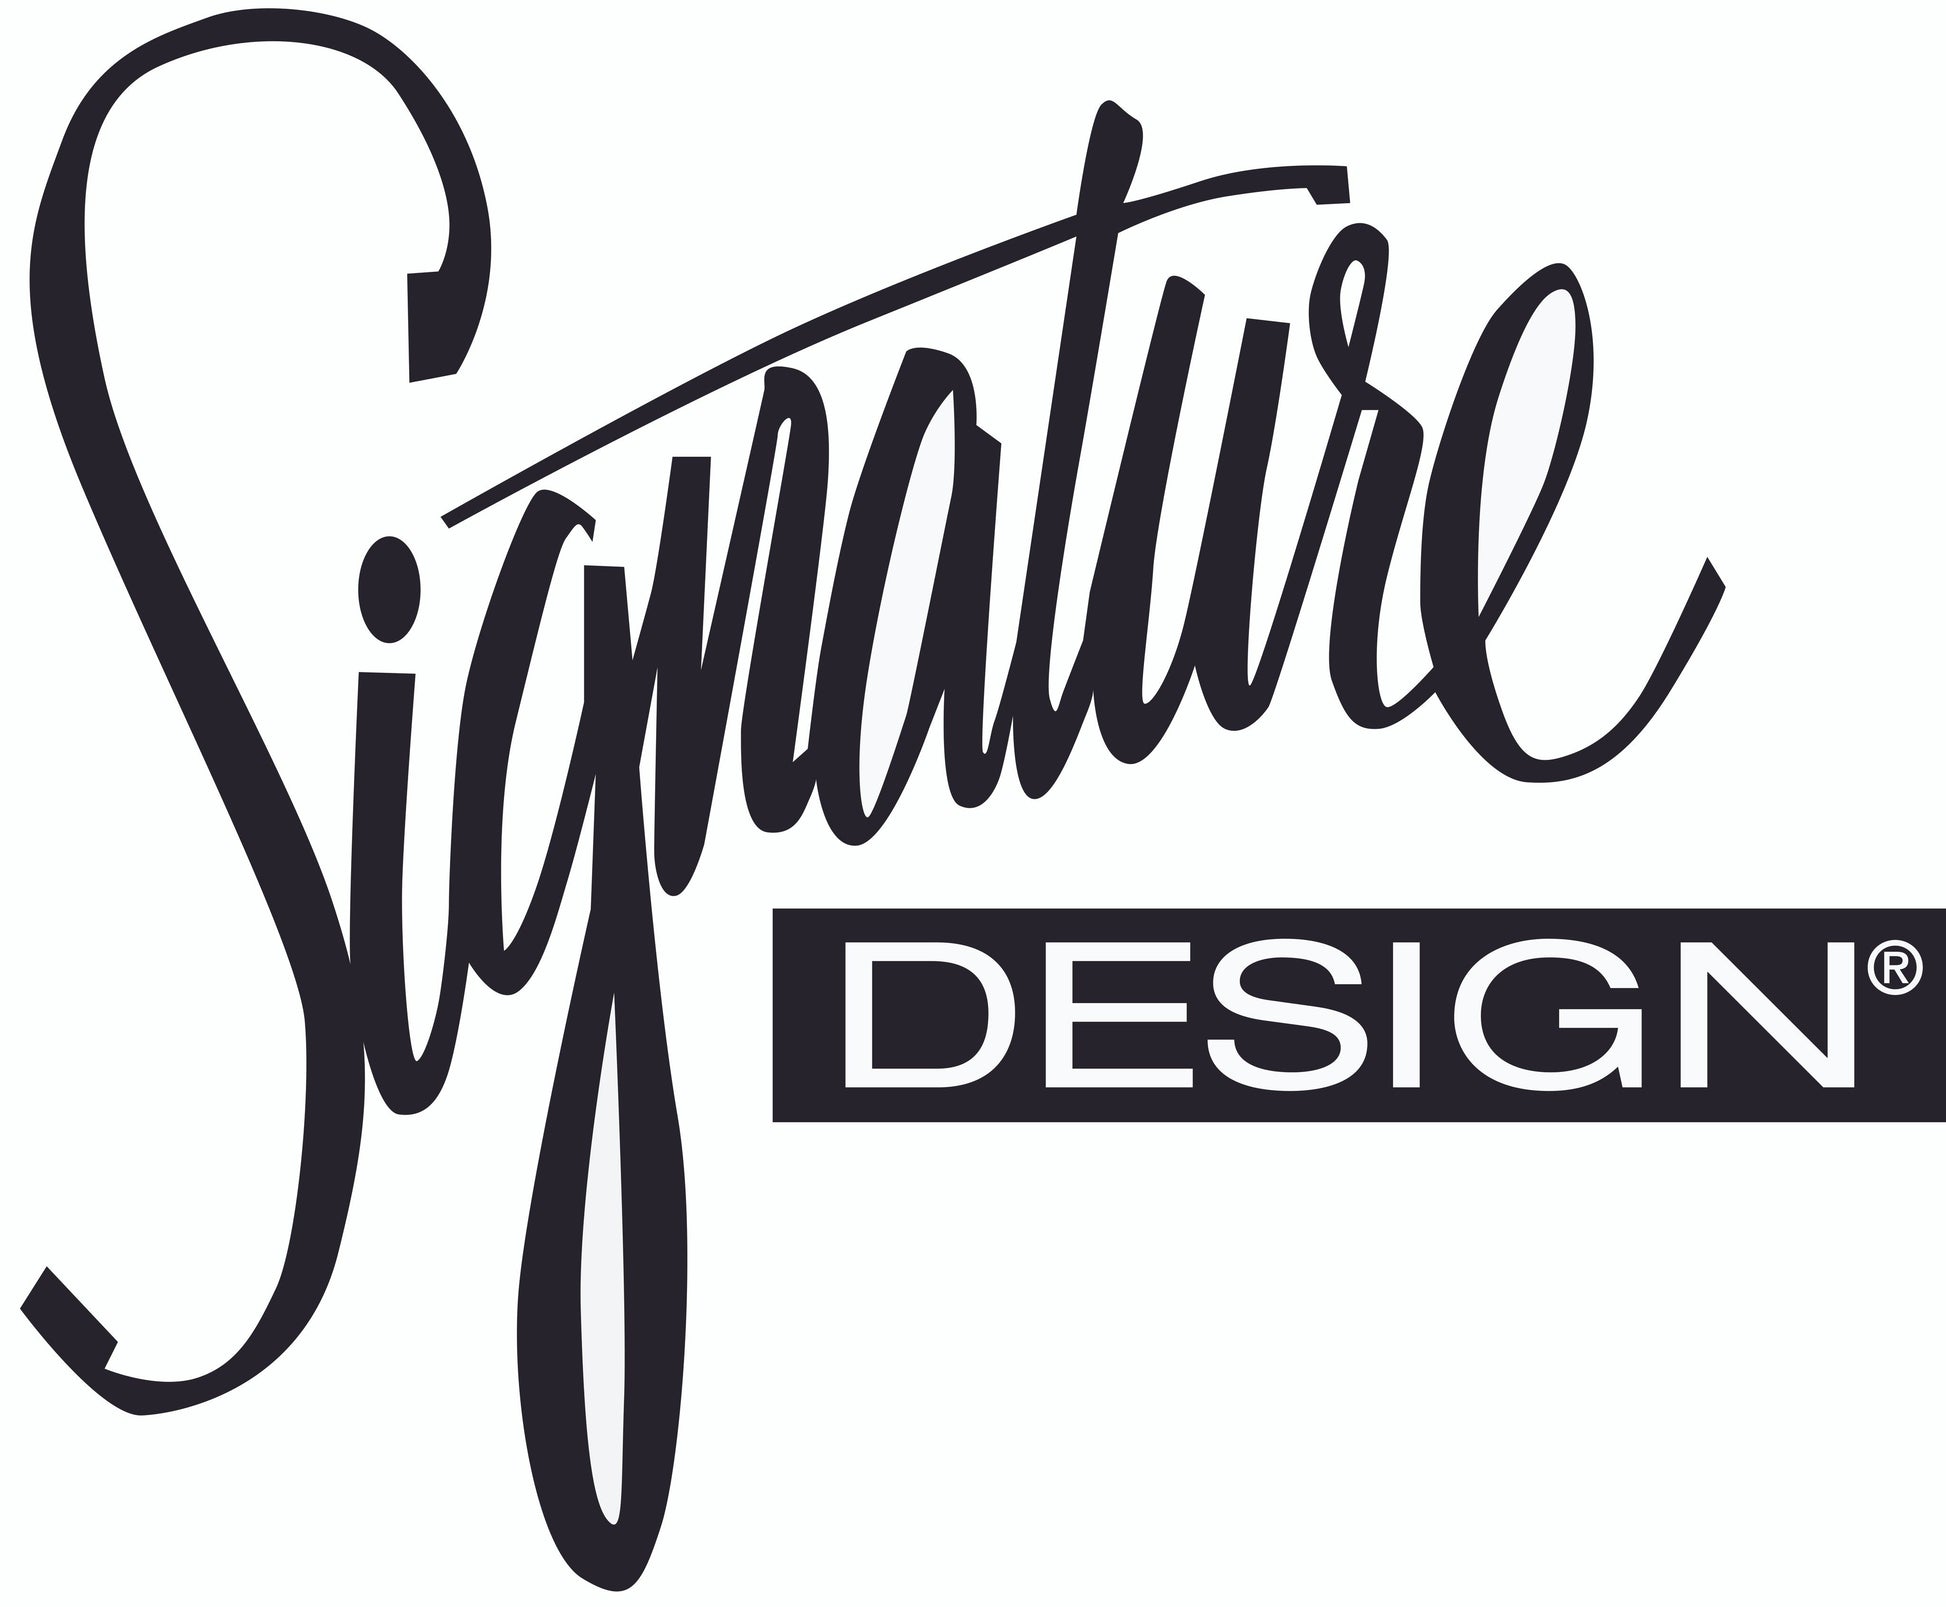 Janismore Home Office Desk Signature Design by Ashley®